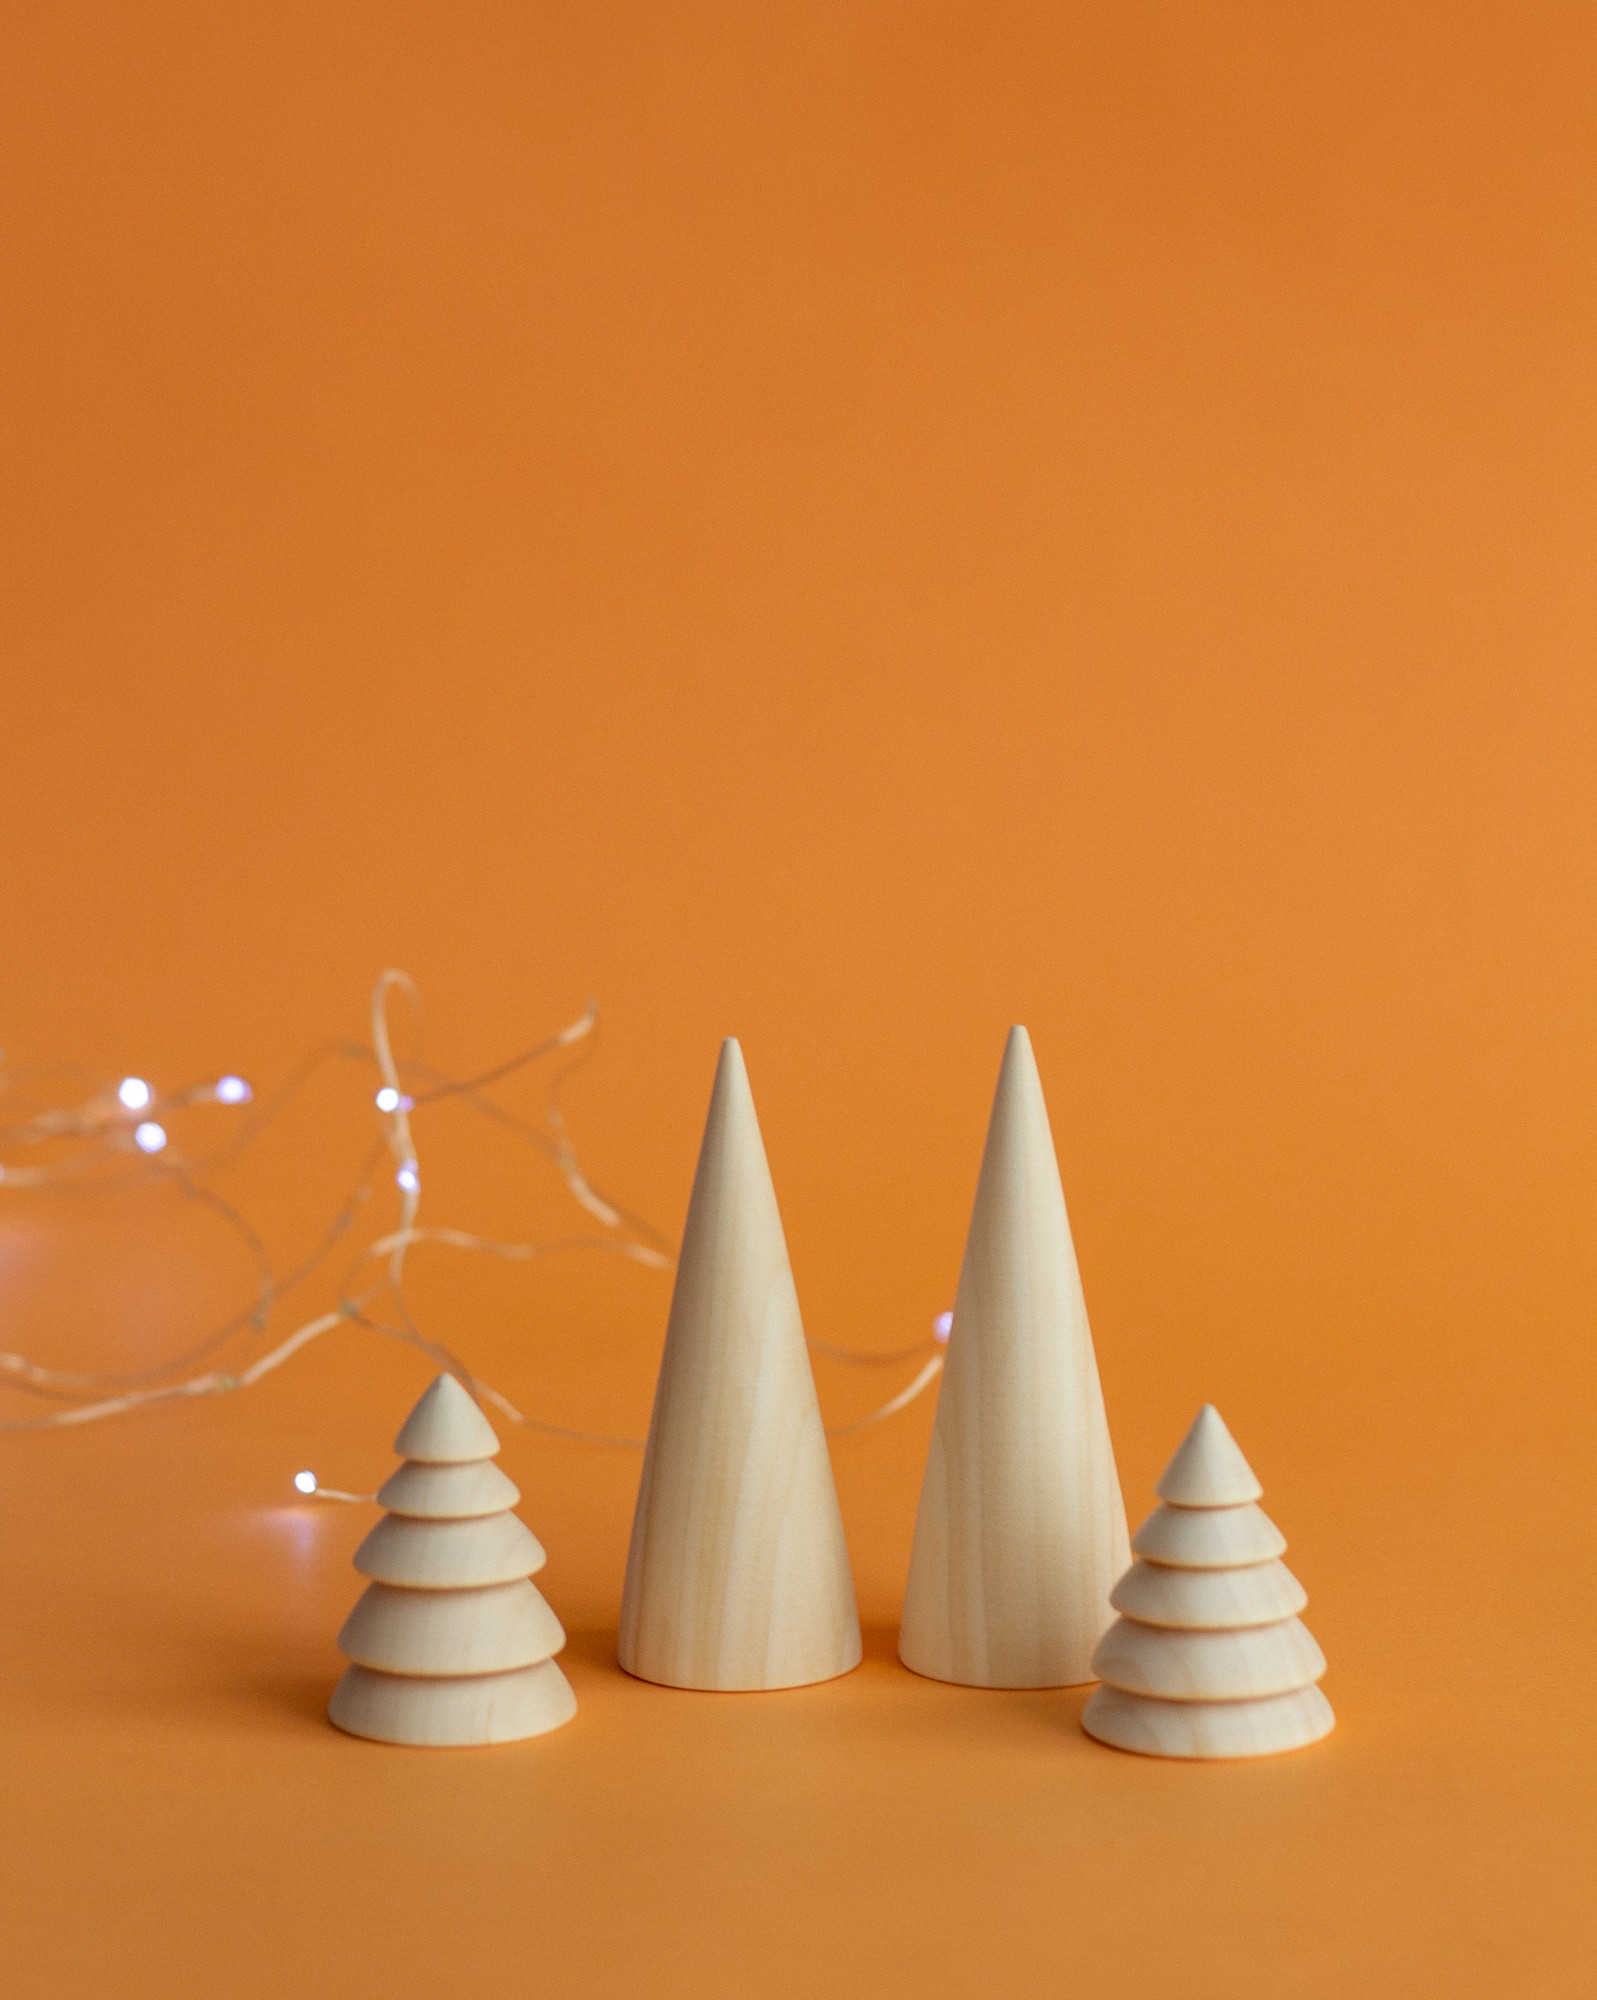 A set of wooden Christmas trees